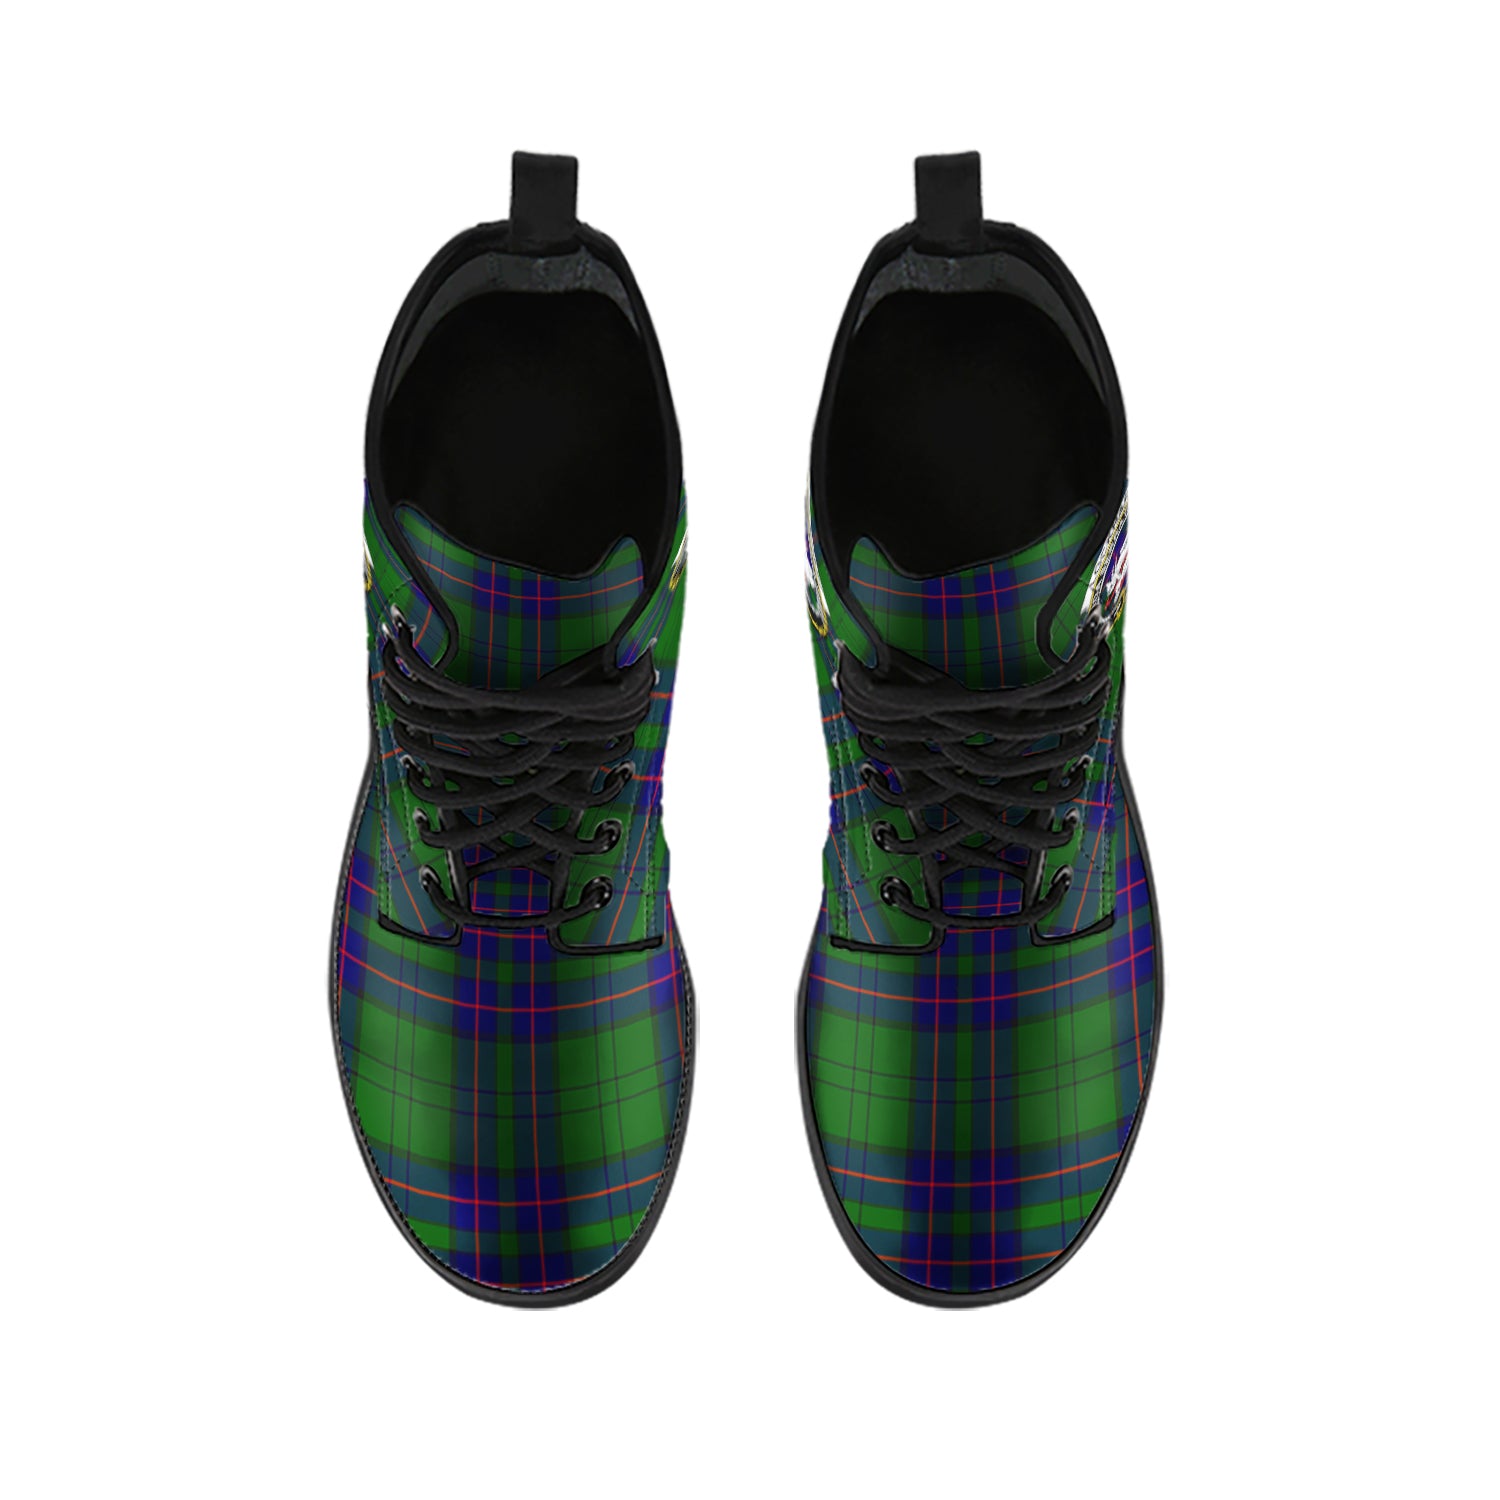 lockhart-modern-tartan-leather-boots-with-family-crest